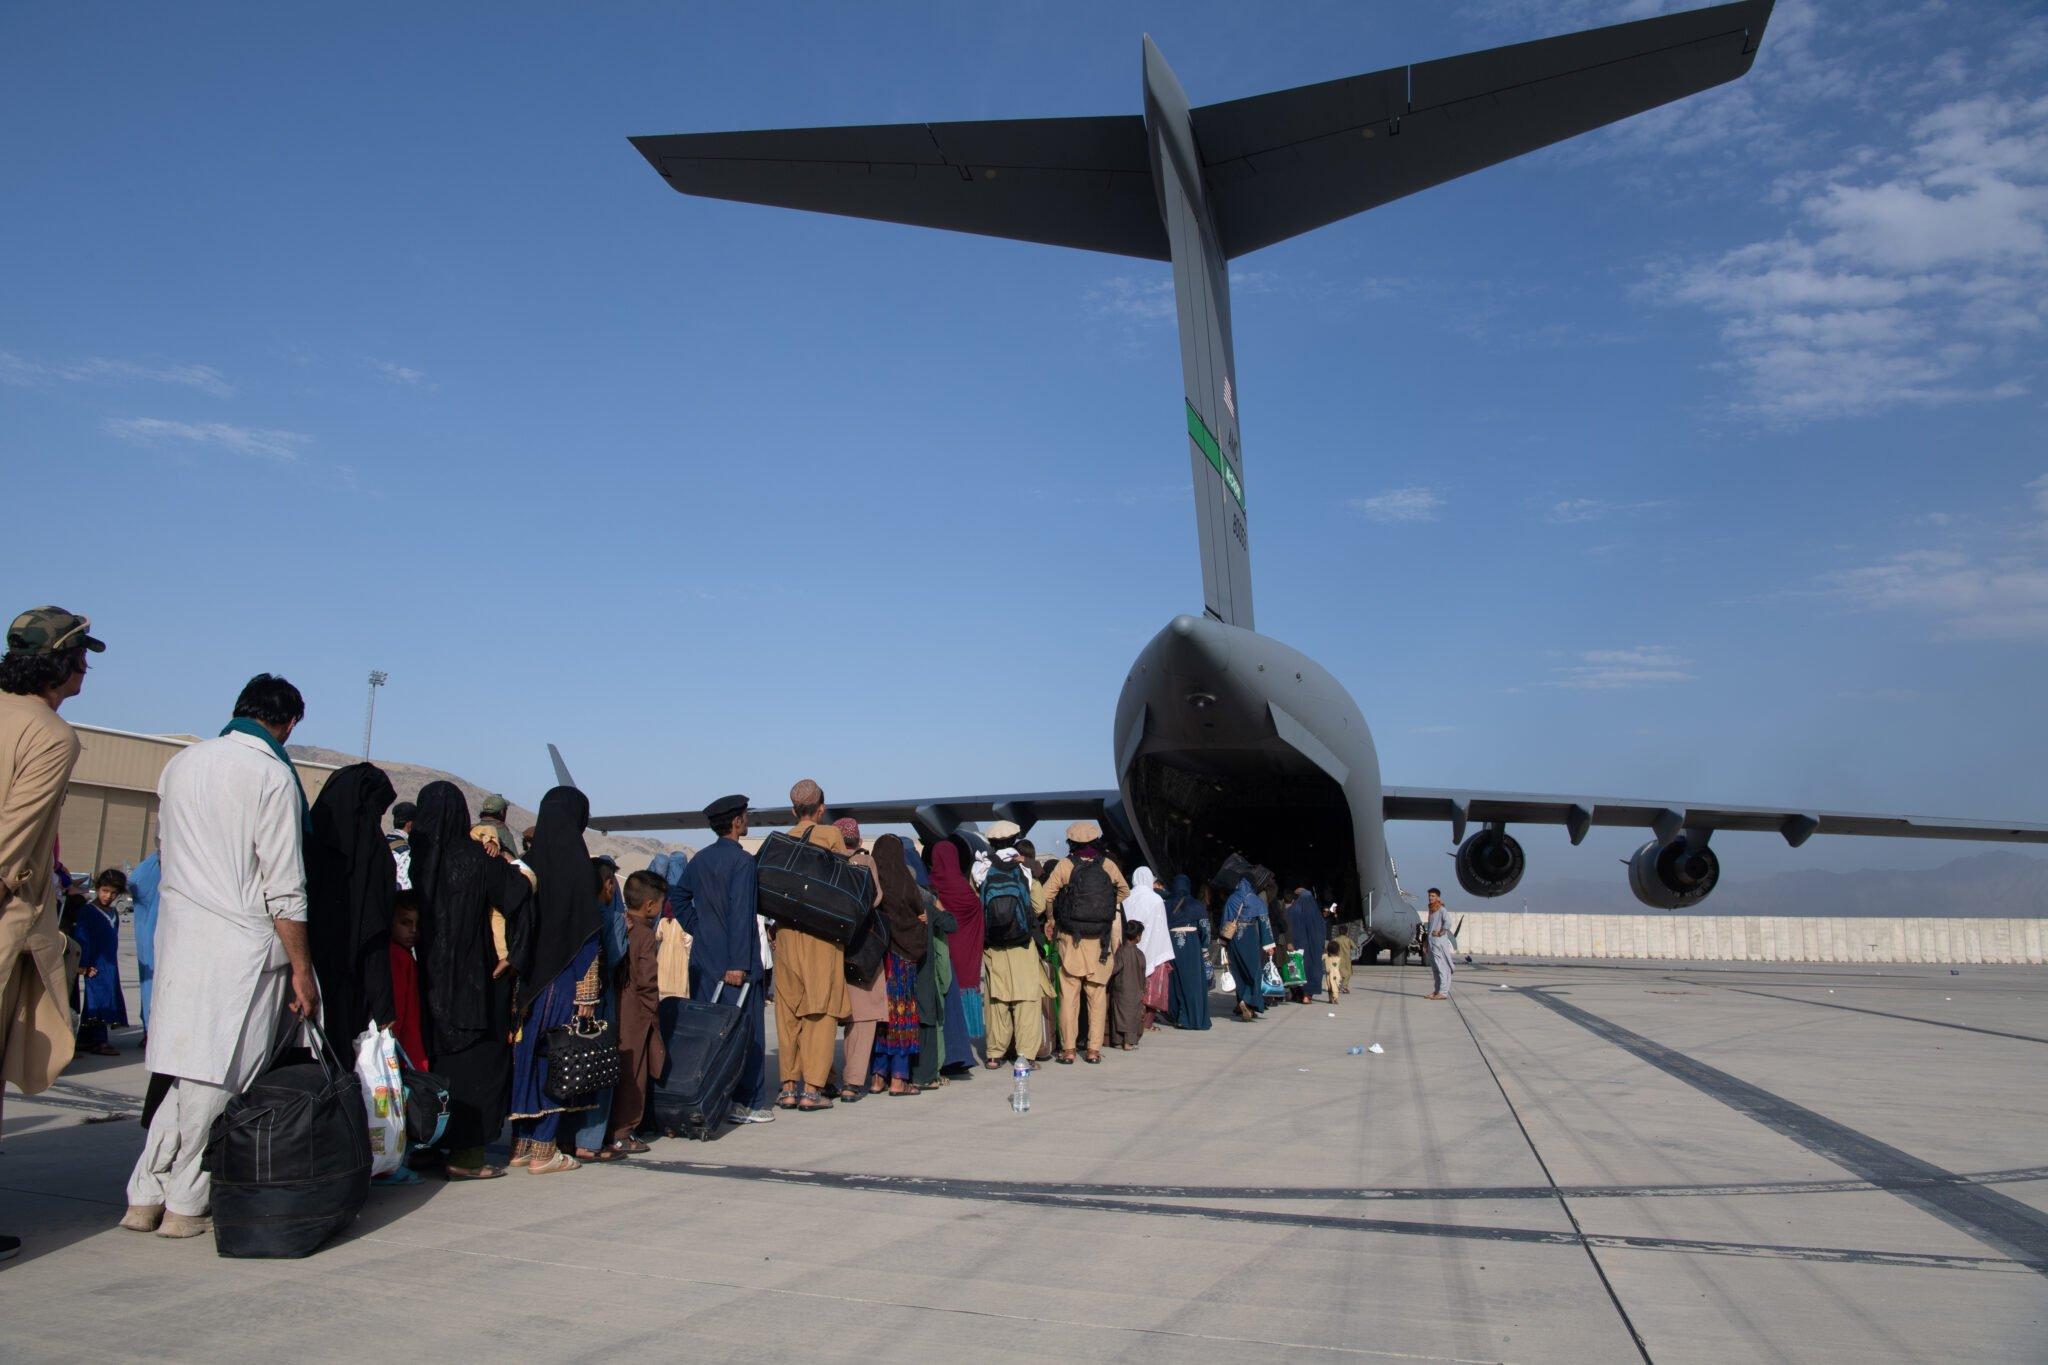 US airmen load passengers aboard a U.S. Air Force C-17 at Hamid Karzai International Airport in Afghanistan. (US Air Force/Master Sgt. Donald R. Allen)